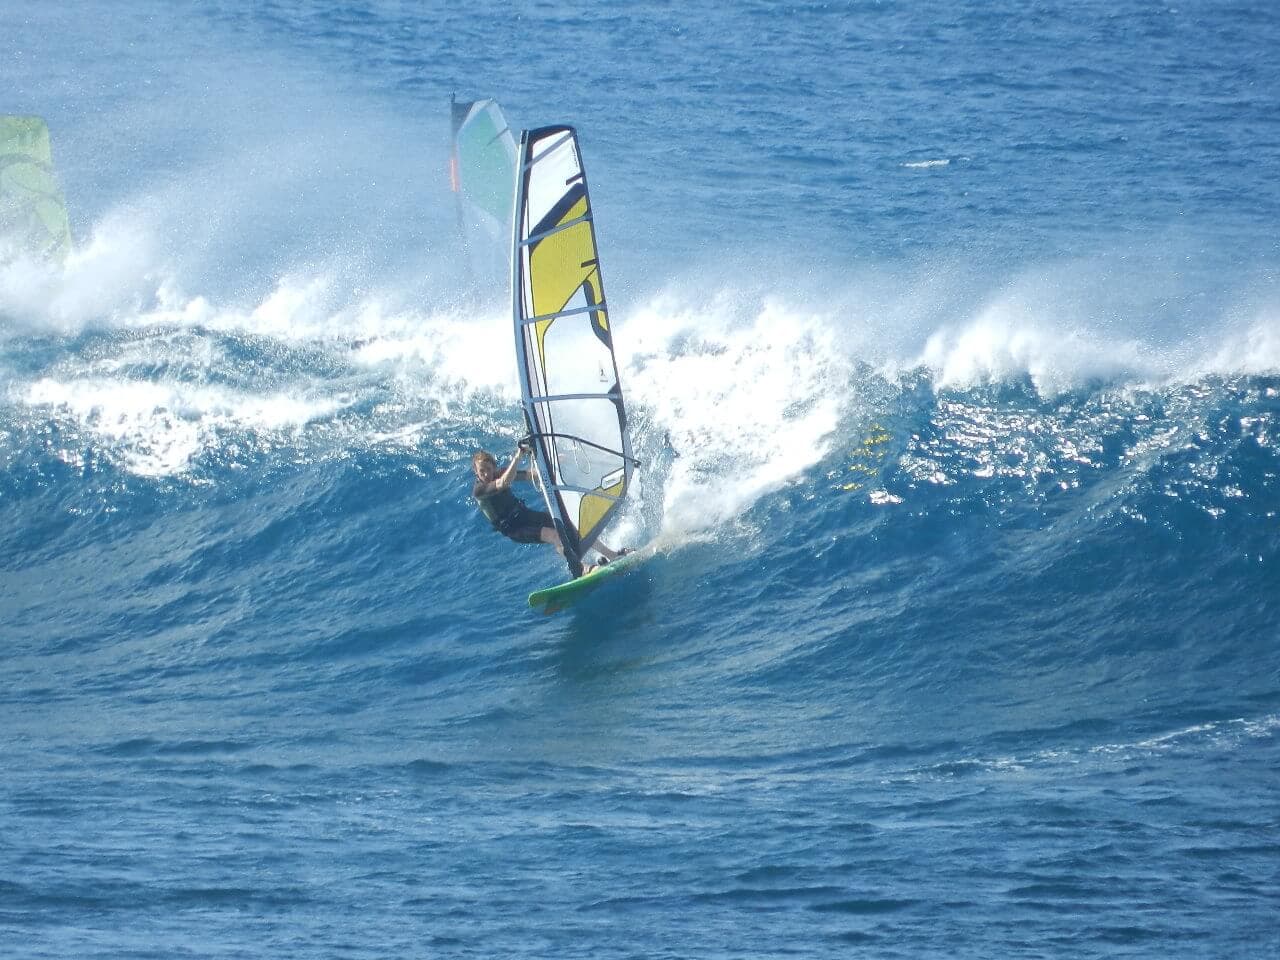 A scene of a young woman windsurfing on rough wave